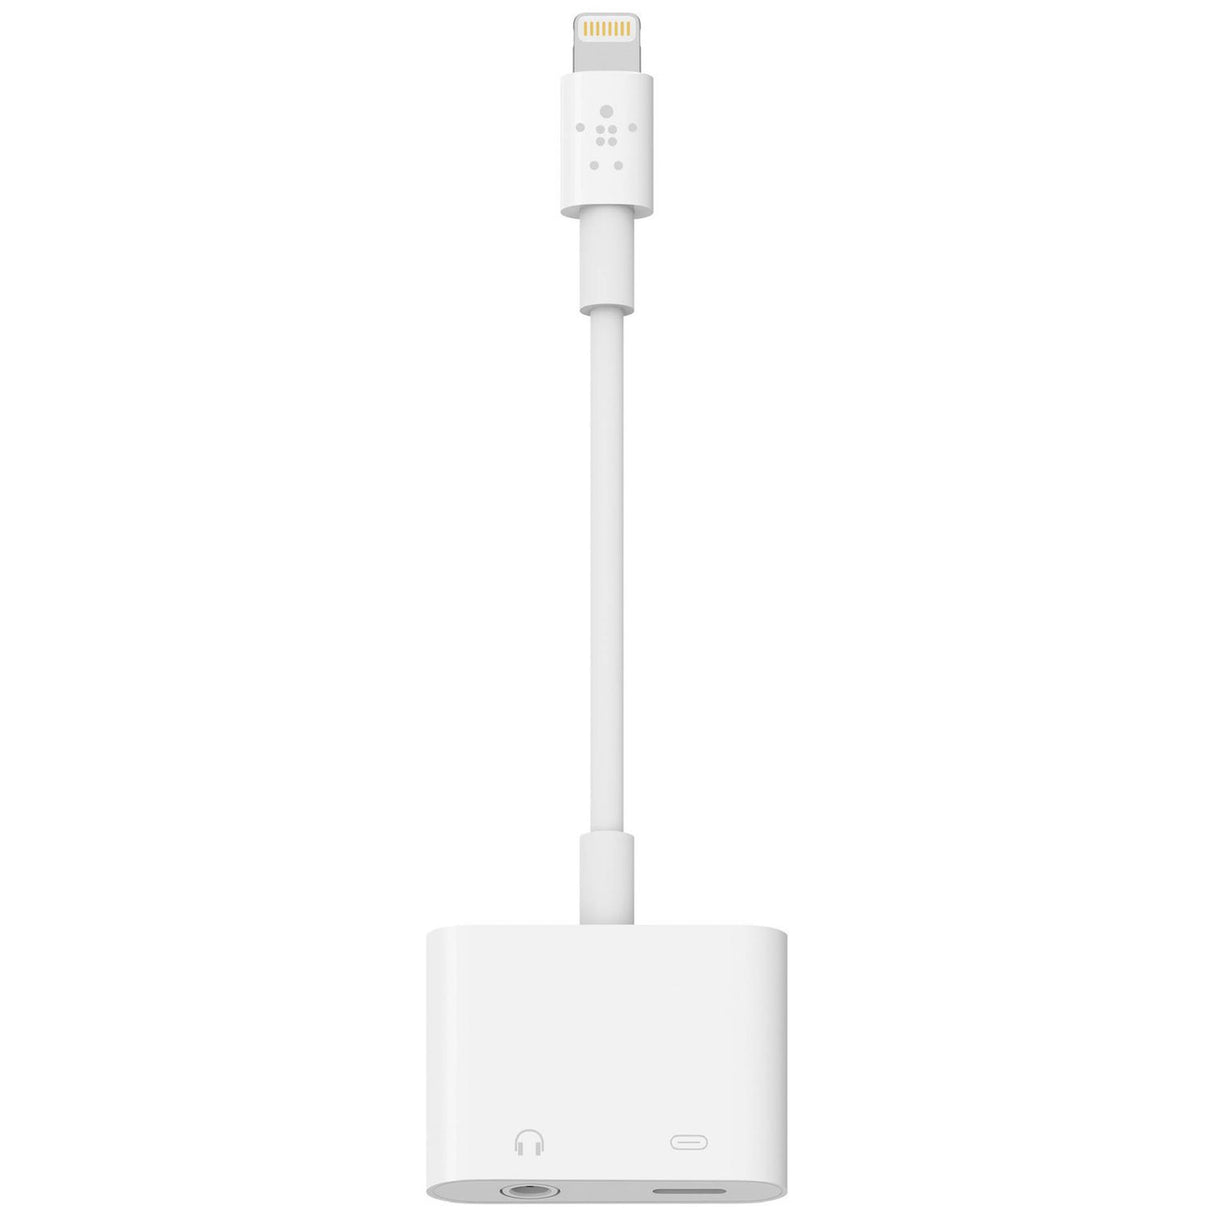 Belkin 3.5 mm Audio and Charge for iPhone and iPad Lightning Adapter - Lightning/Mini-phone Audio/Power/Data Transfer Cable for Headphone, Speaker, Microphone, Remote Control, Audio Device, iPhone, iPad, Notebook